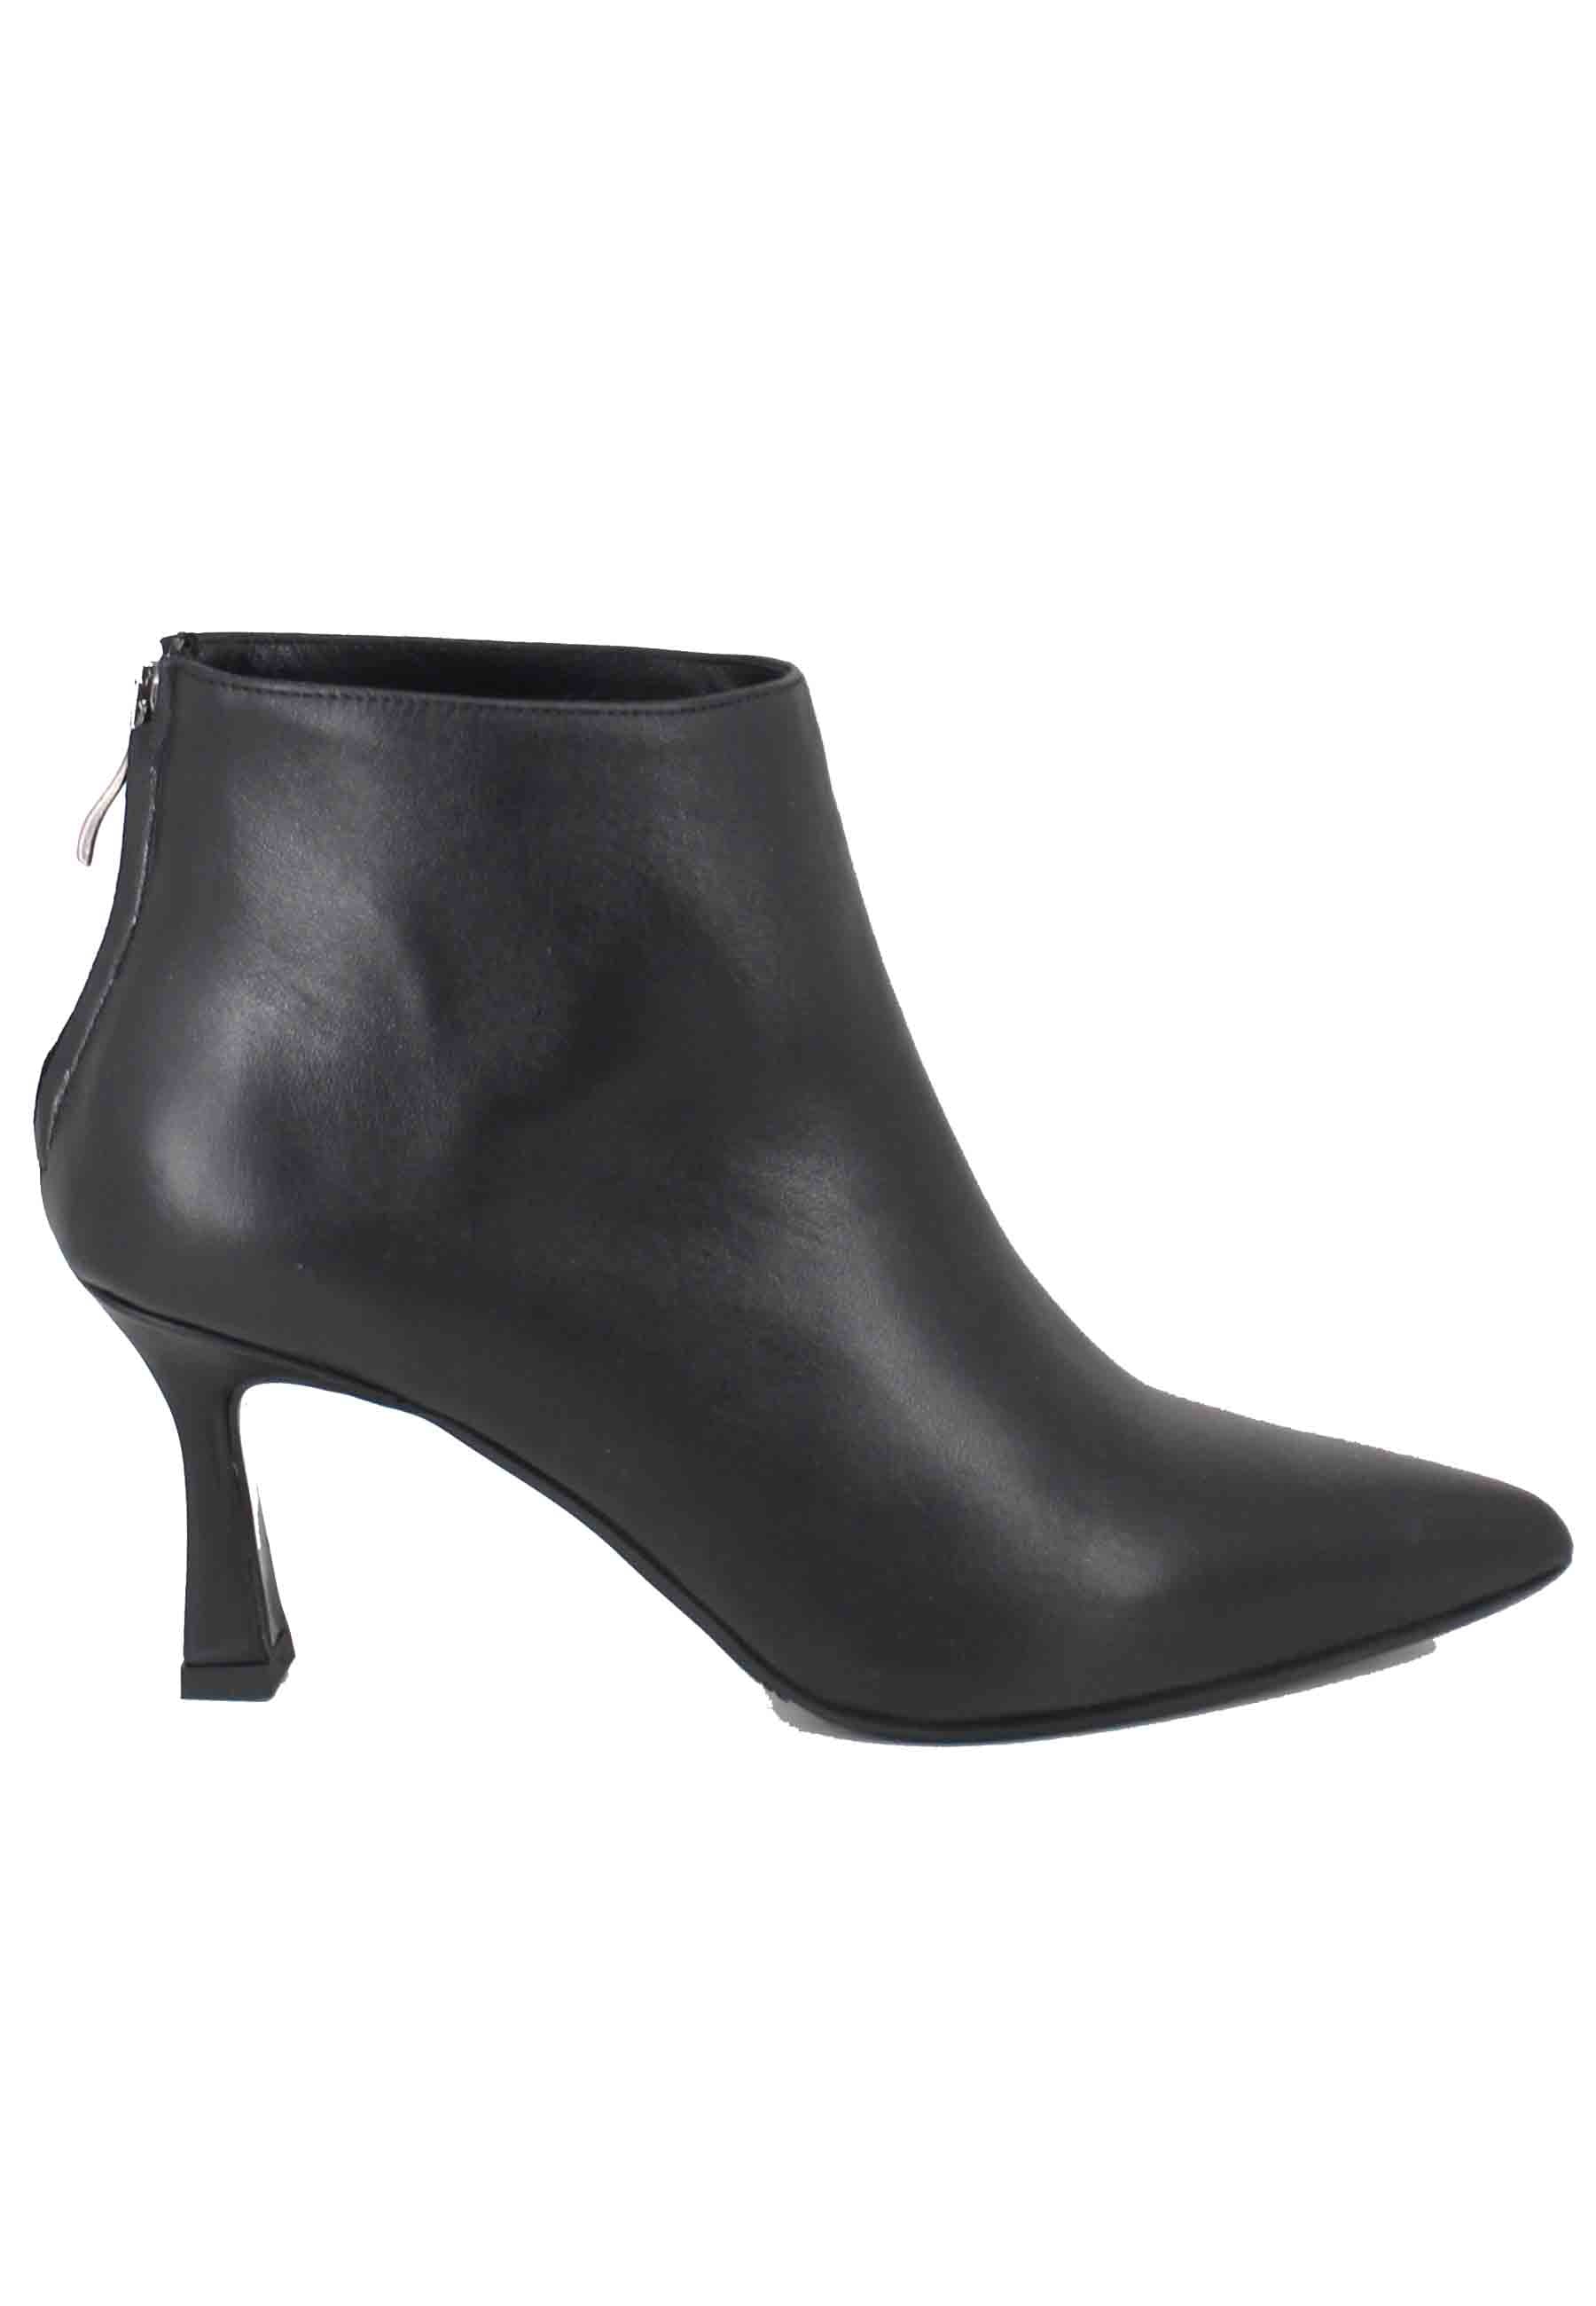 Women's black leather ankle boots with side zip